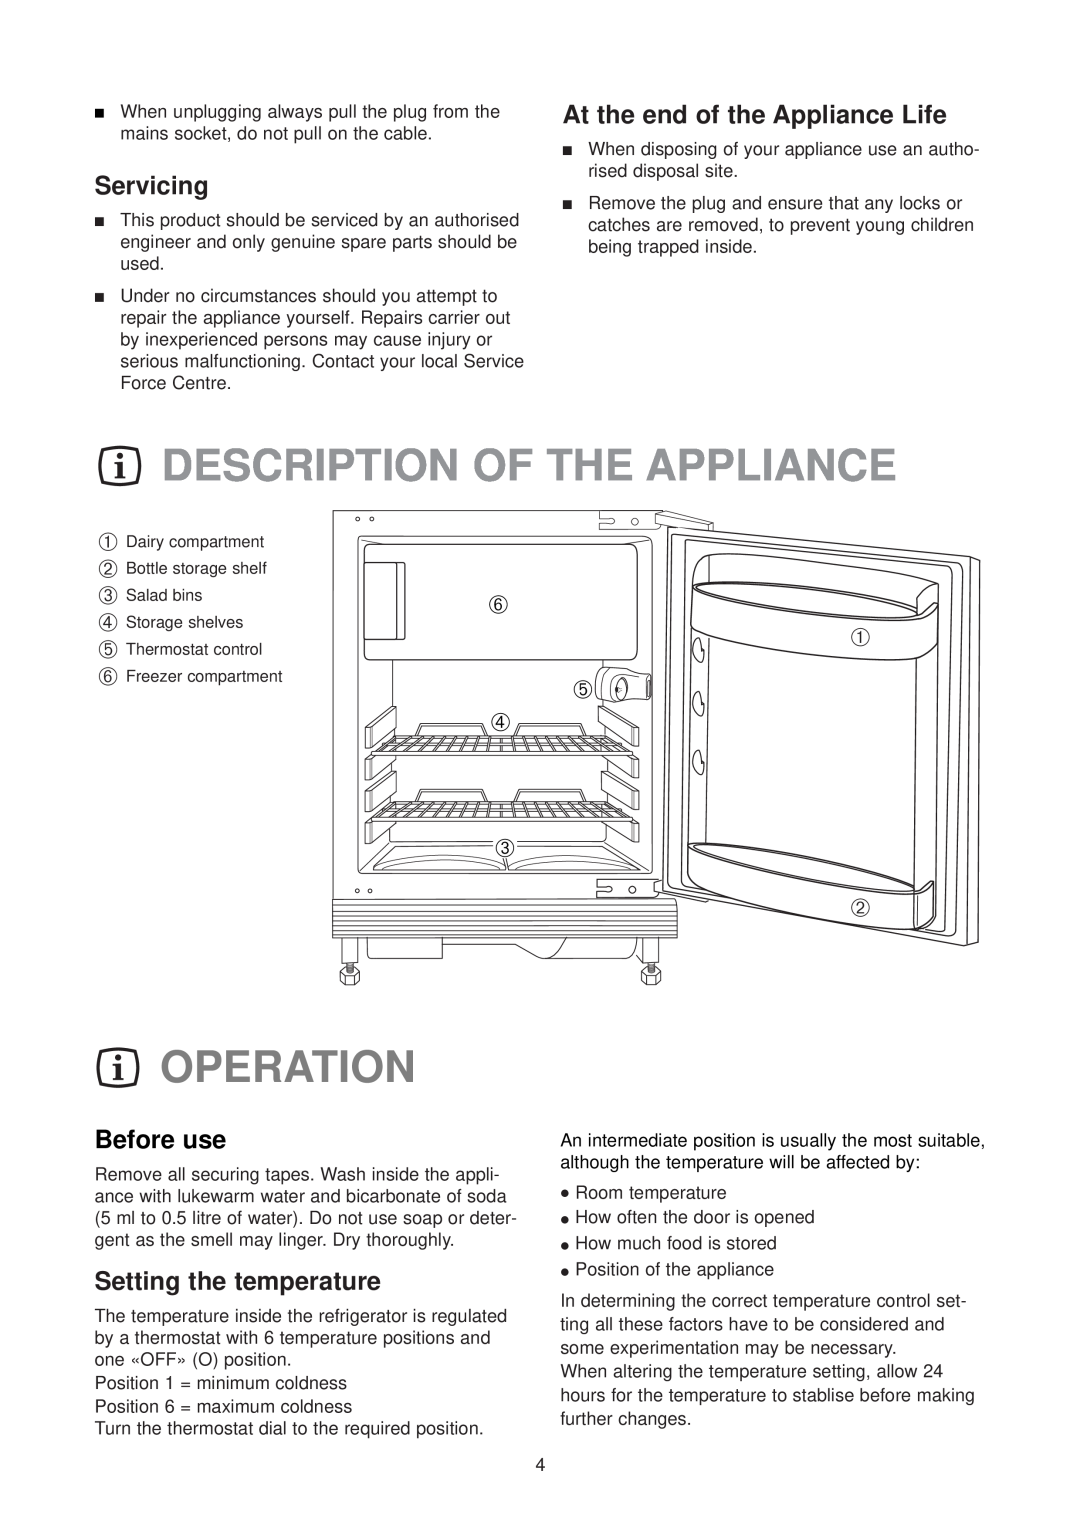 Electrolux ER 6336 U Description Of The Appliance, Operation, Servicing, At the end of the Appliance Life, Before use 